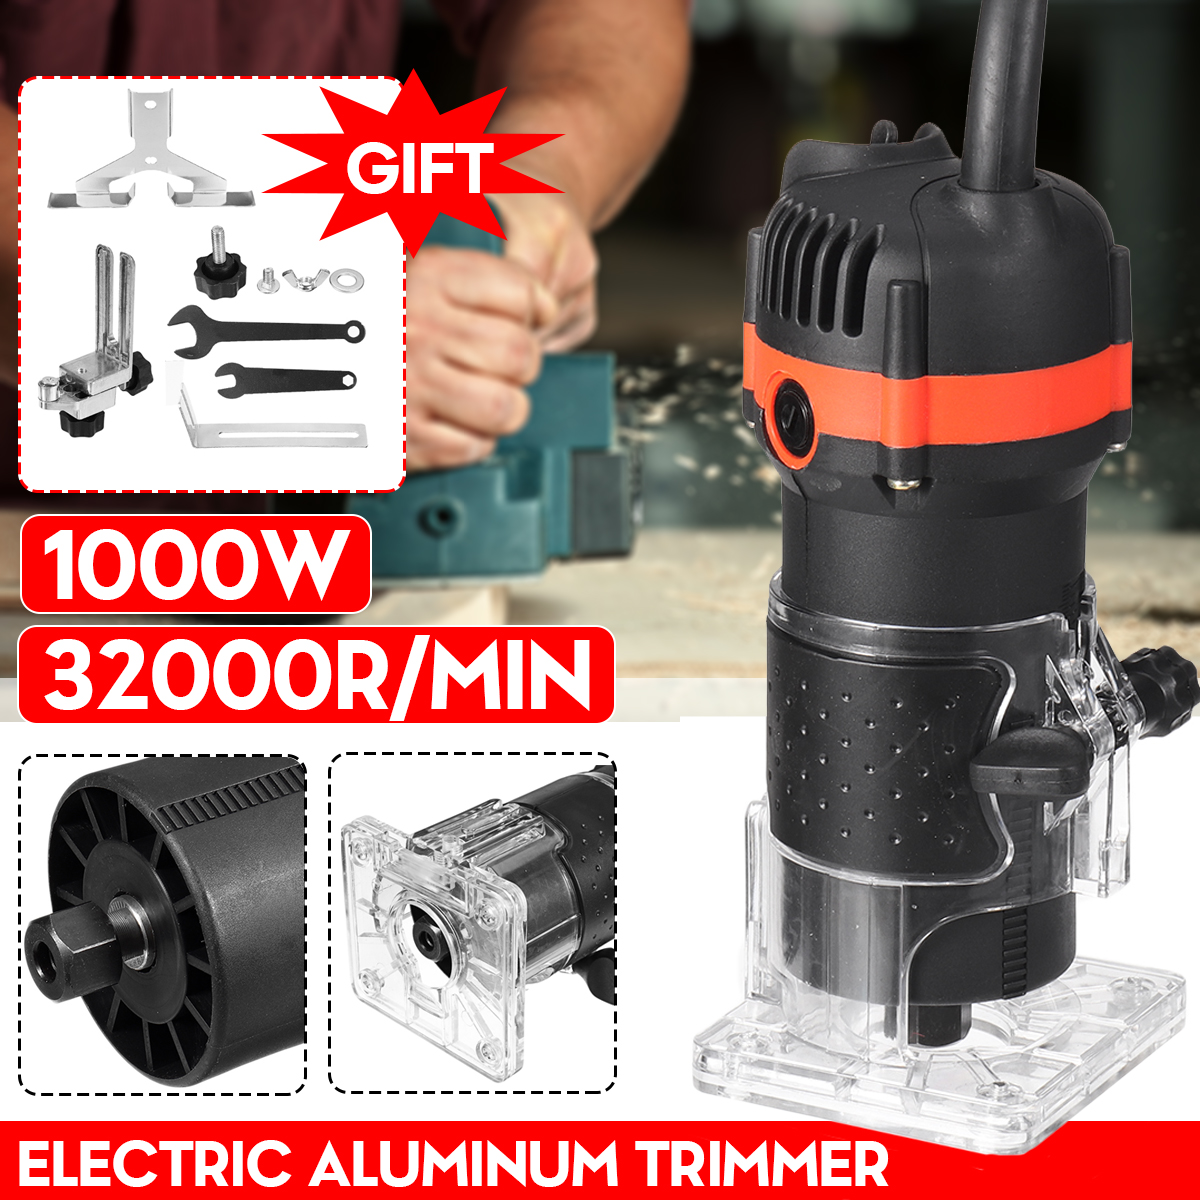 1000W-Woodworking-Trimmer-Electric-Trimming-Machine-Wood-Milling-Slotting-Machine-1781394-1